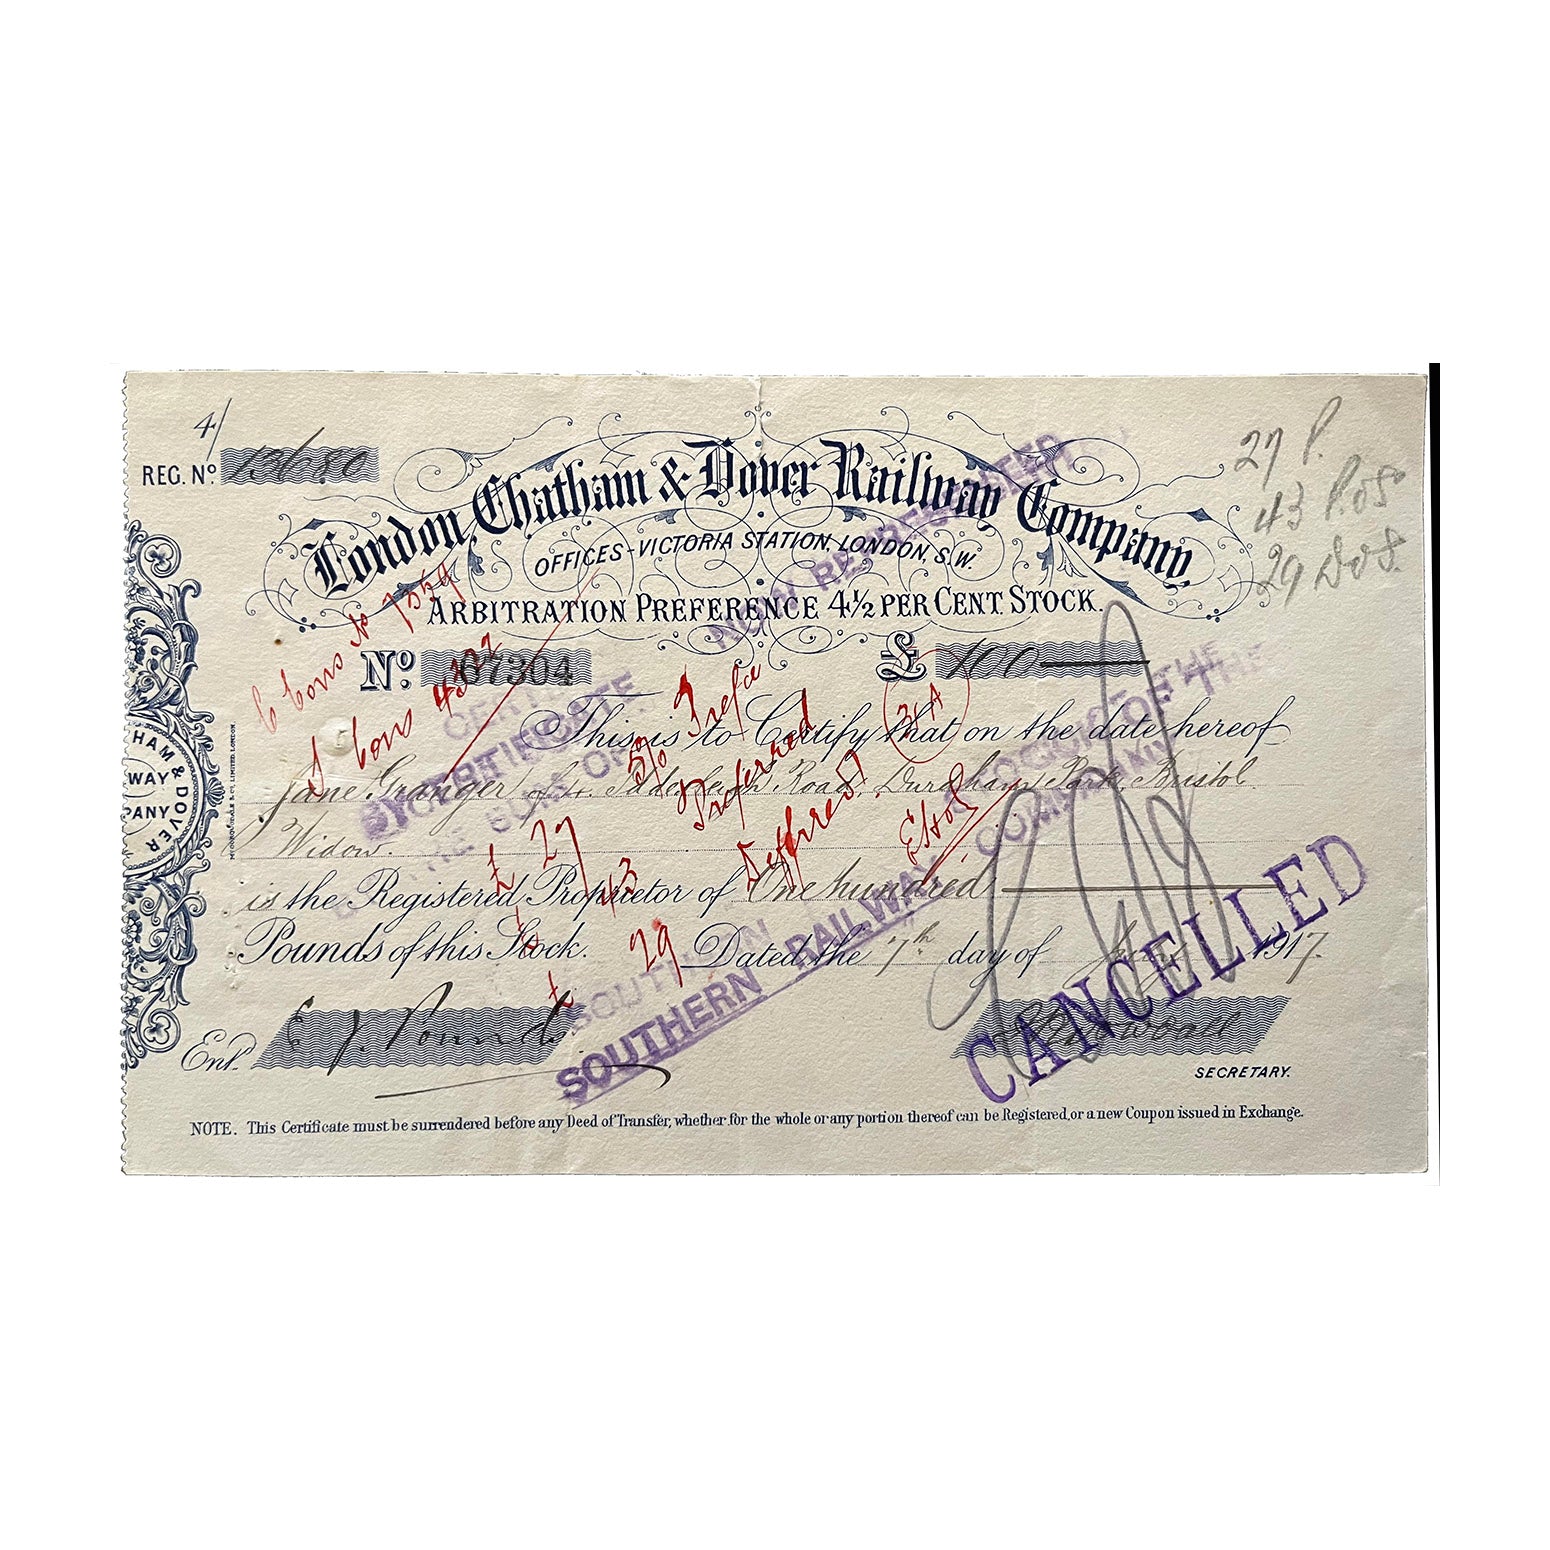 Original railway share certificate, London Chatham & Dover Railway Company, Arbitration Preference 4½ % Stock, £100, issued 1917